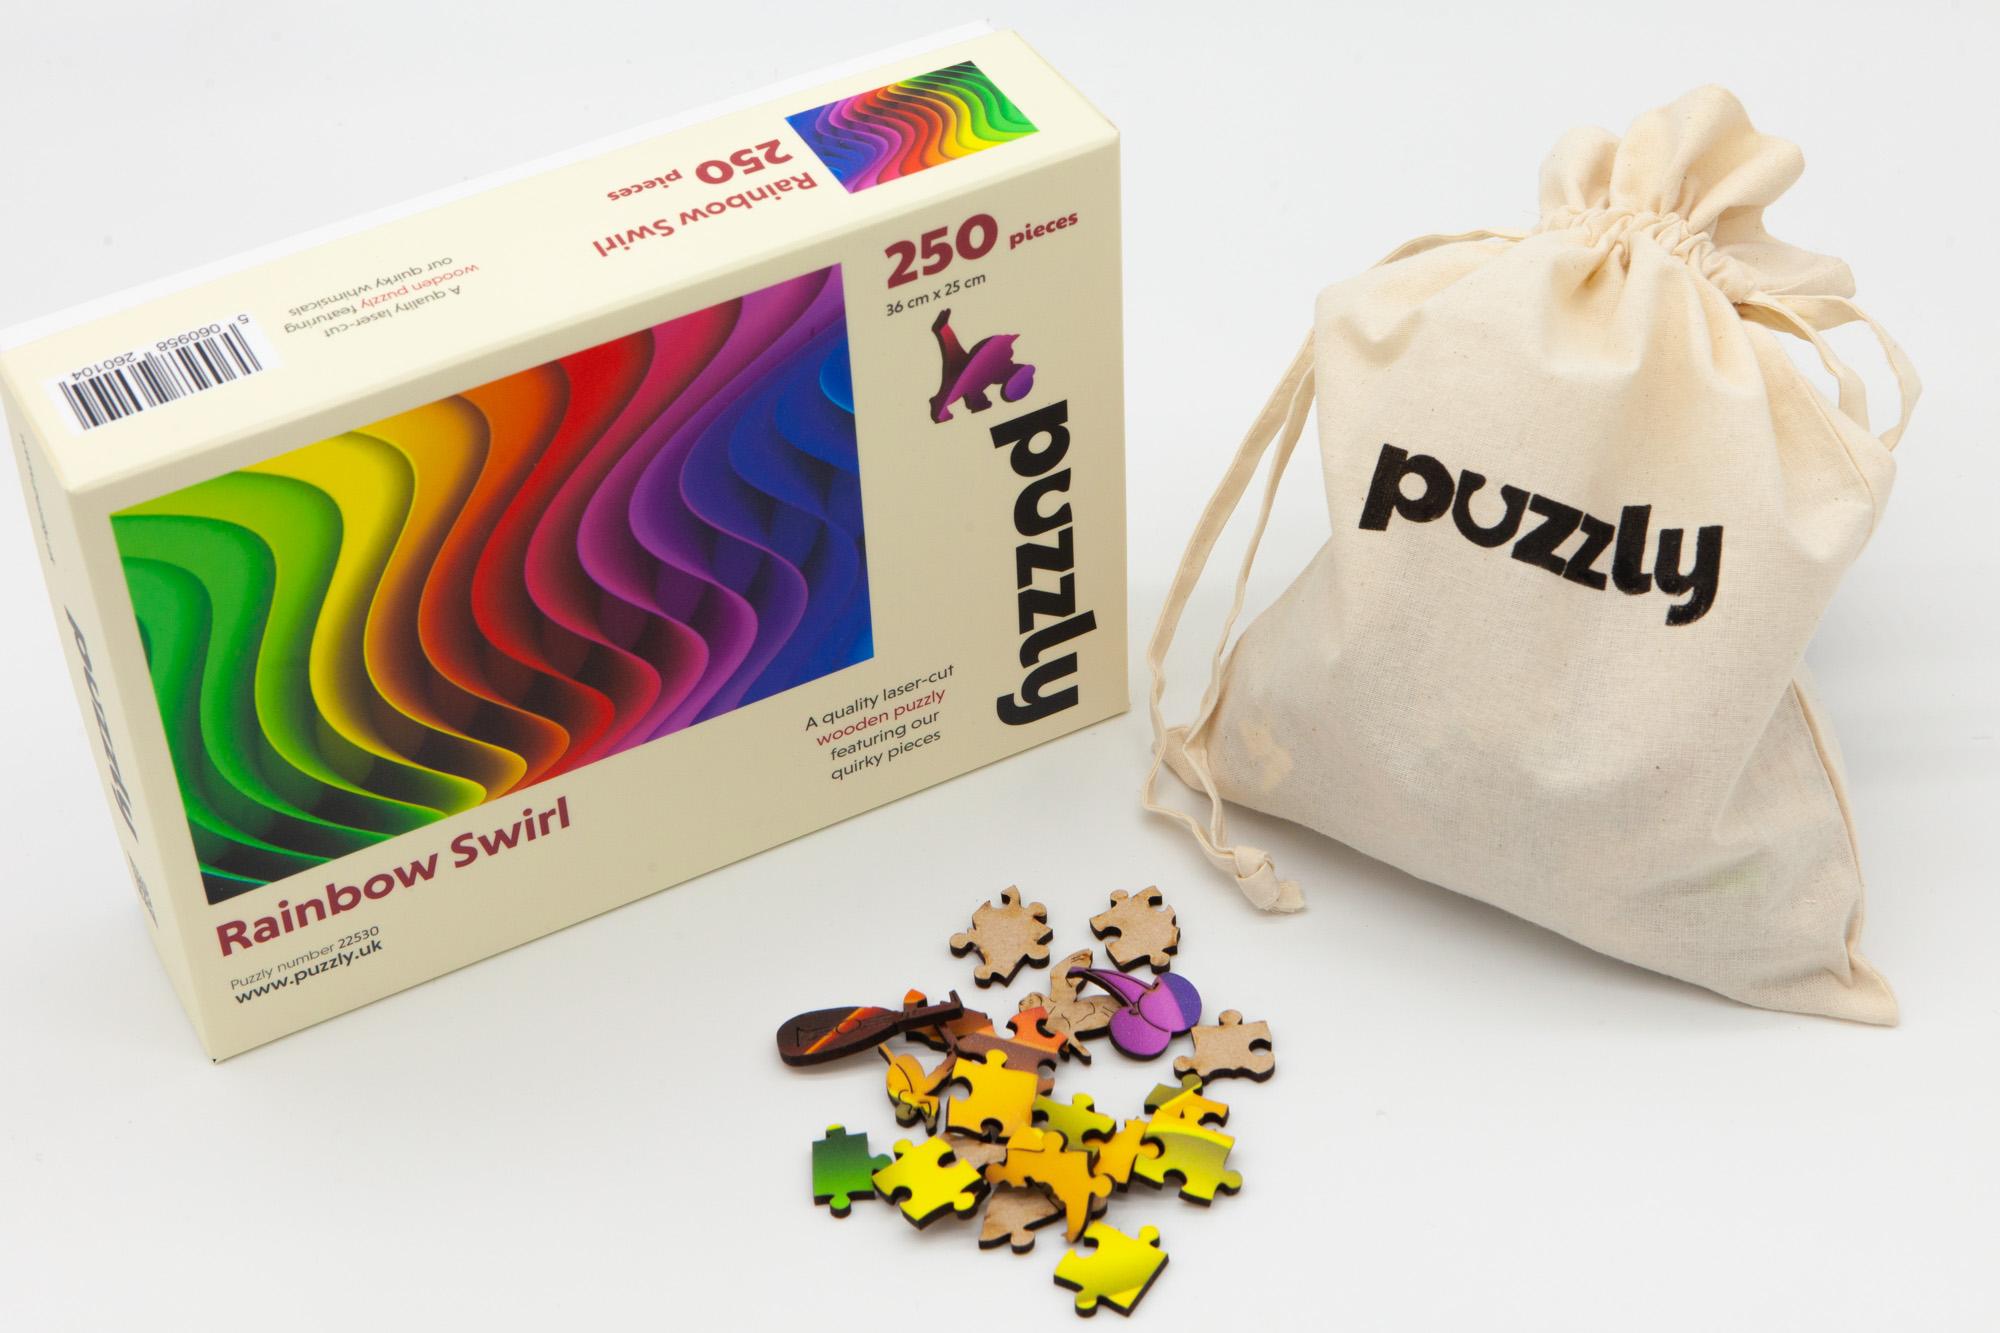 Rainbow Swirl Wooden Puzzle From The Puzzly Company